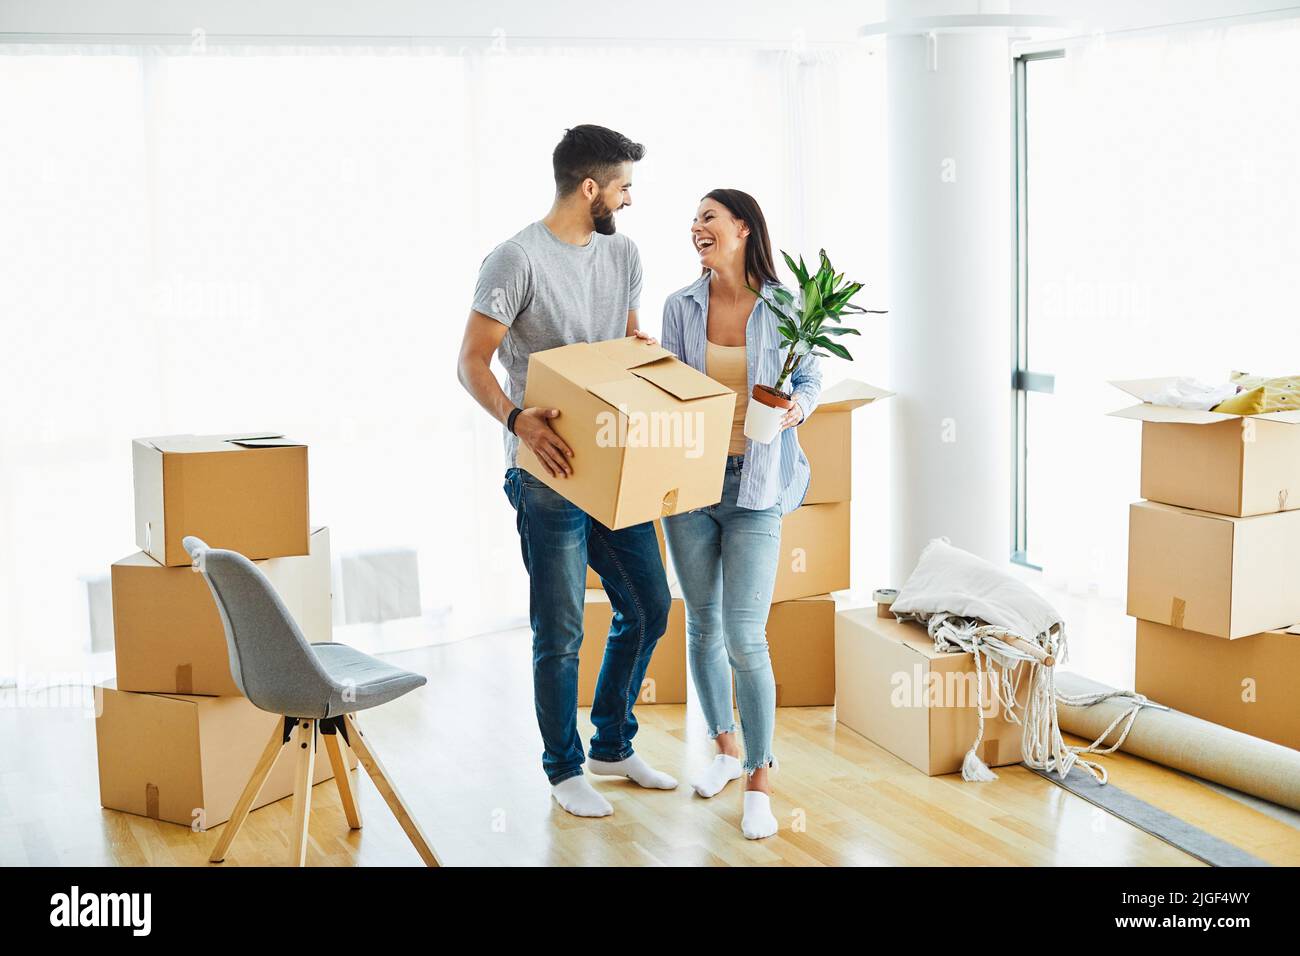 woman couple man box home house moving happy apartment together romantic relocation new property Stock Photo